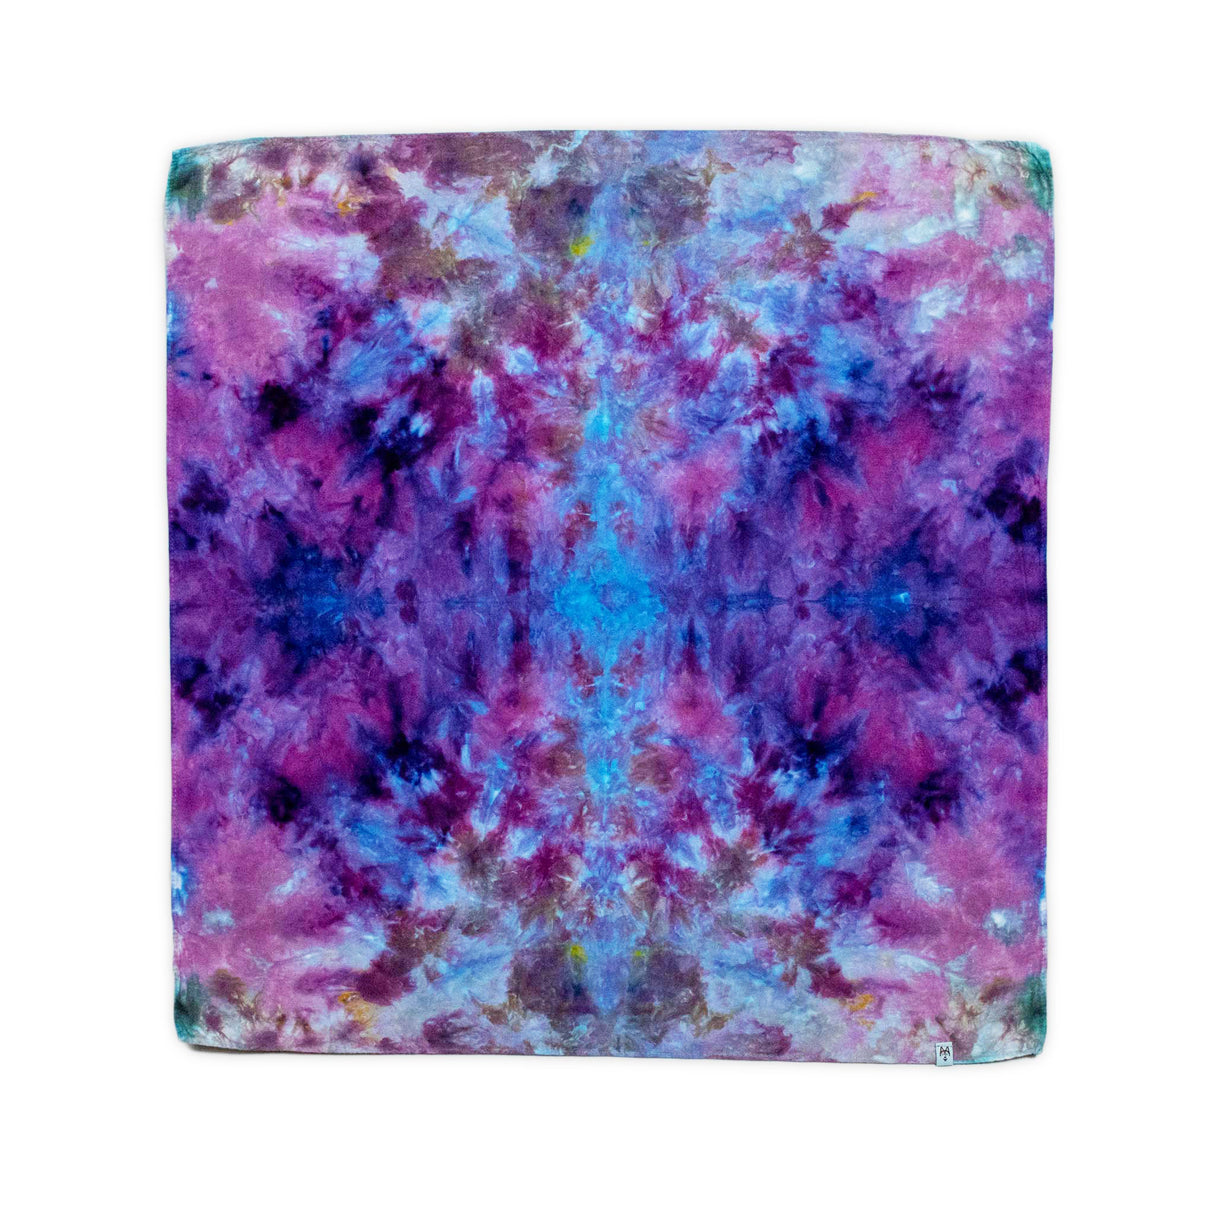 An ice-dyed bandana featuring a mirage of cool shades, where splashes of royal purple blend into pools of sapphire and lilac.